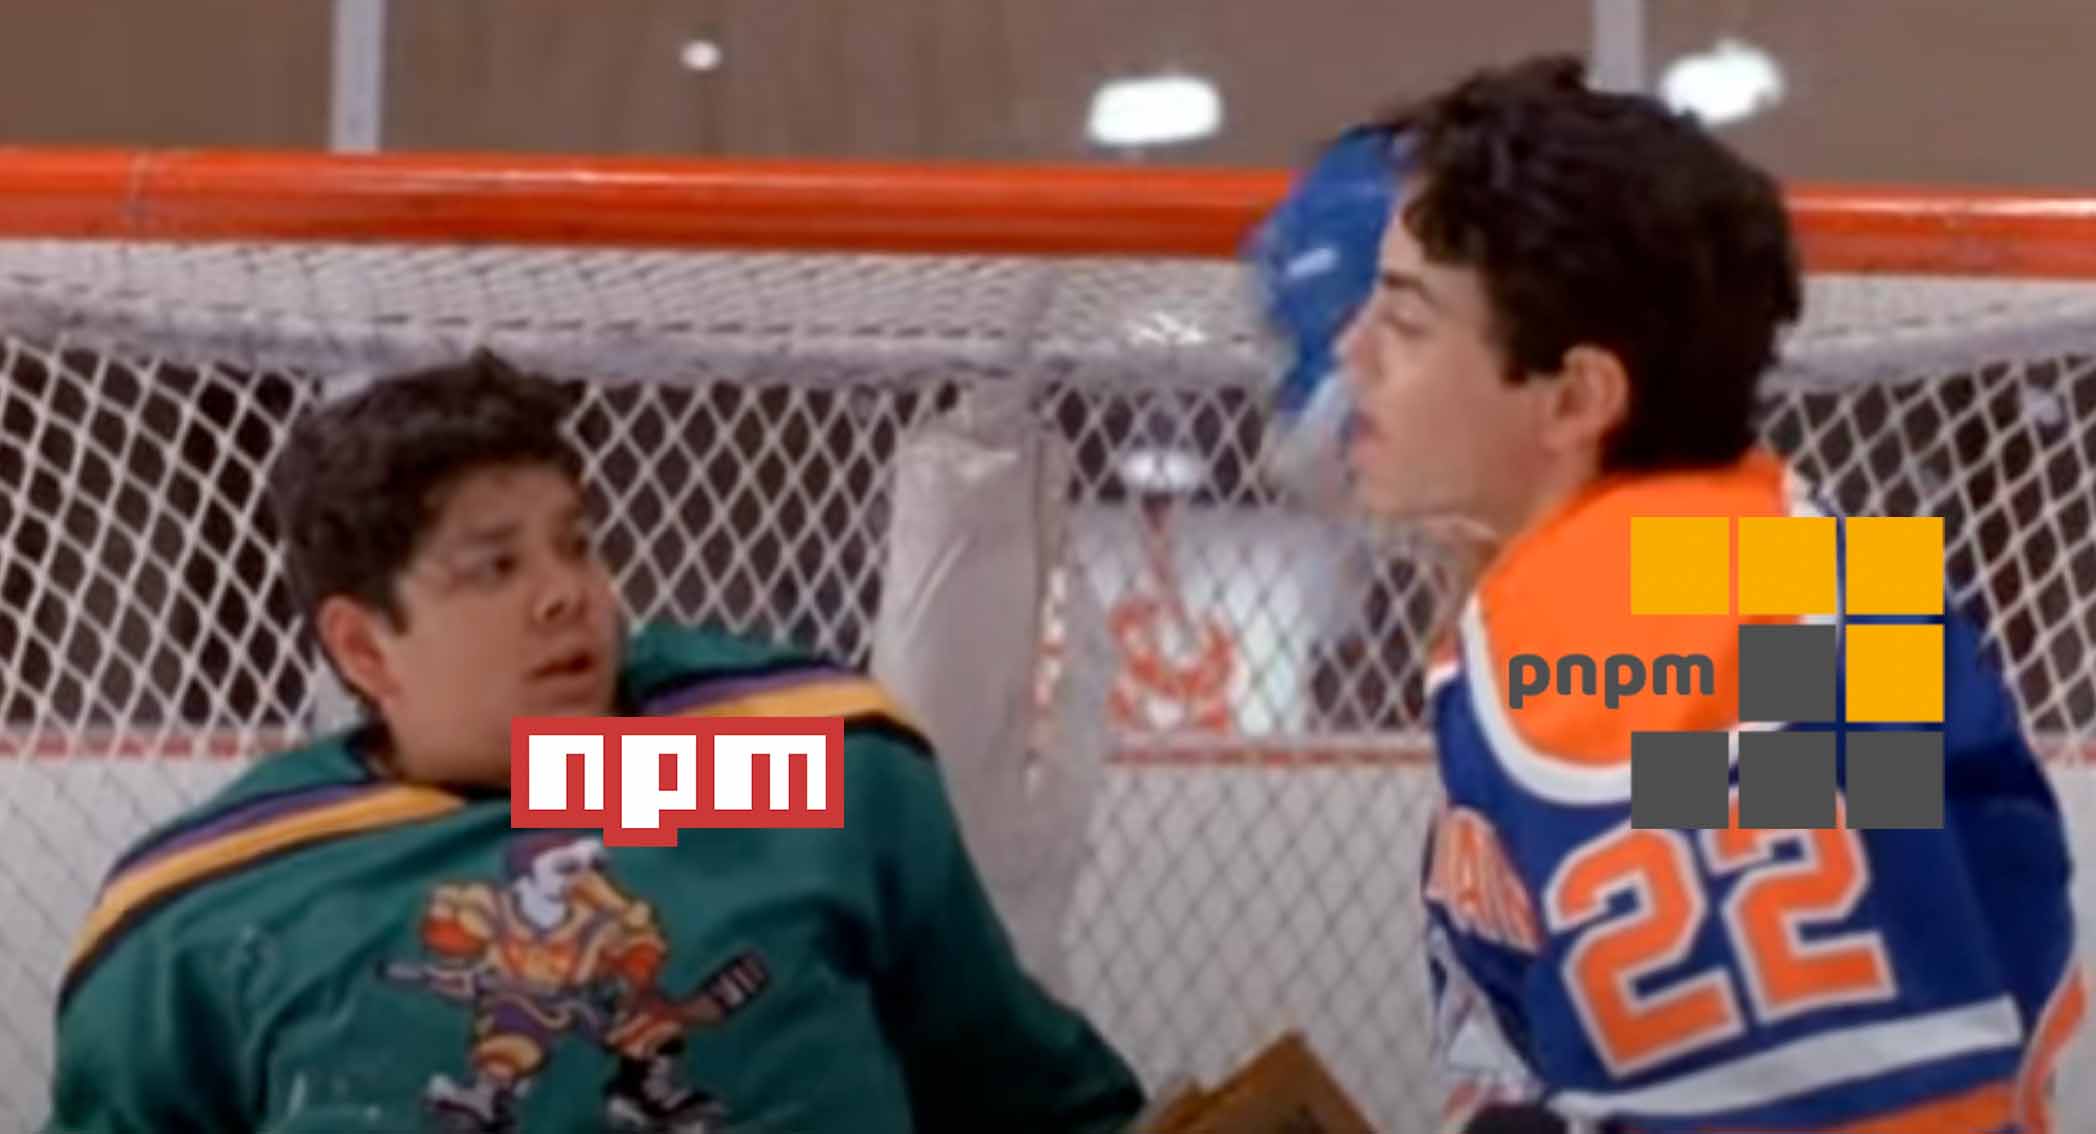 Putting the "p" in npm